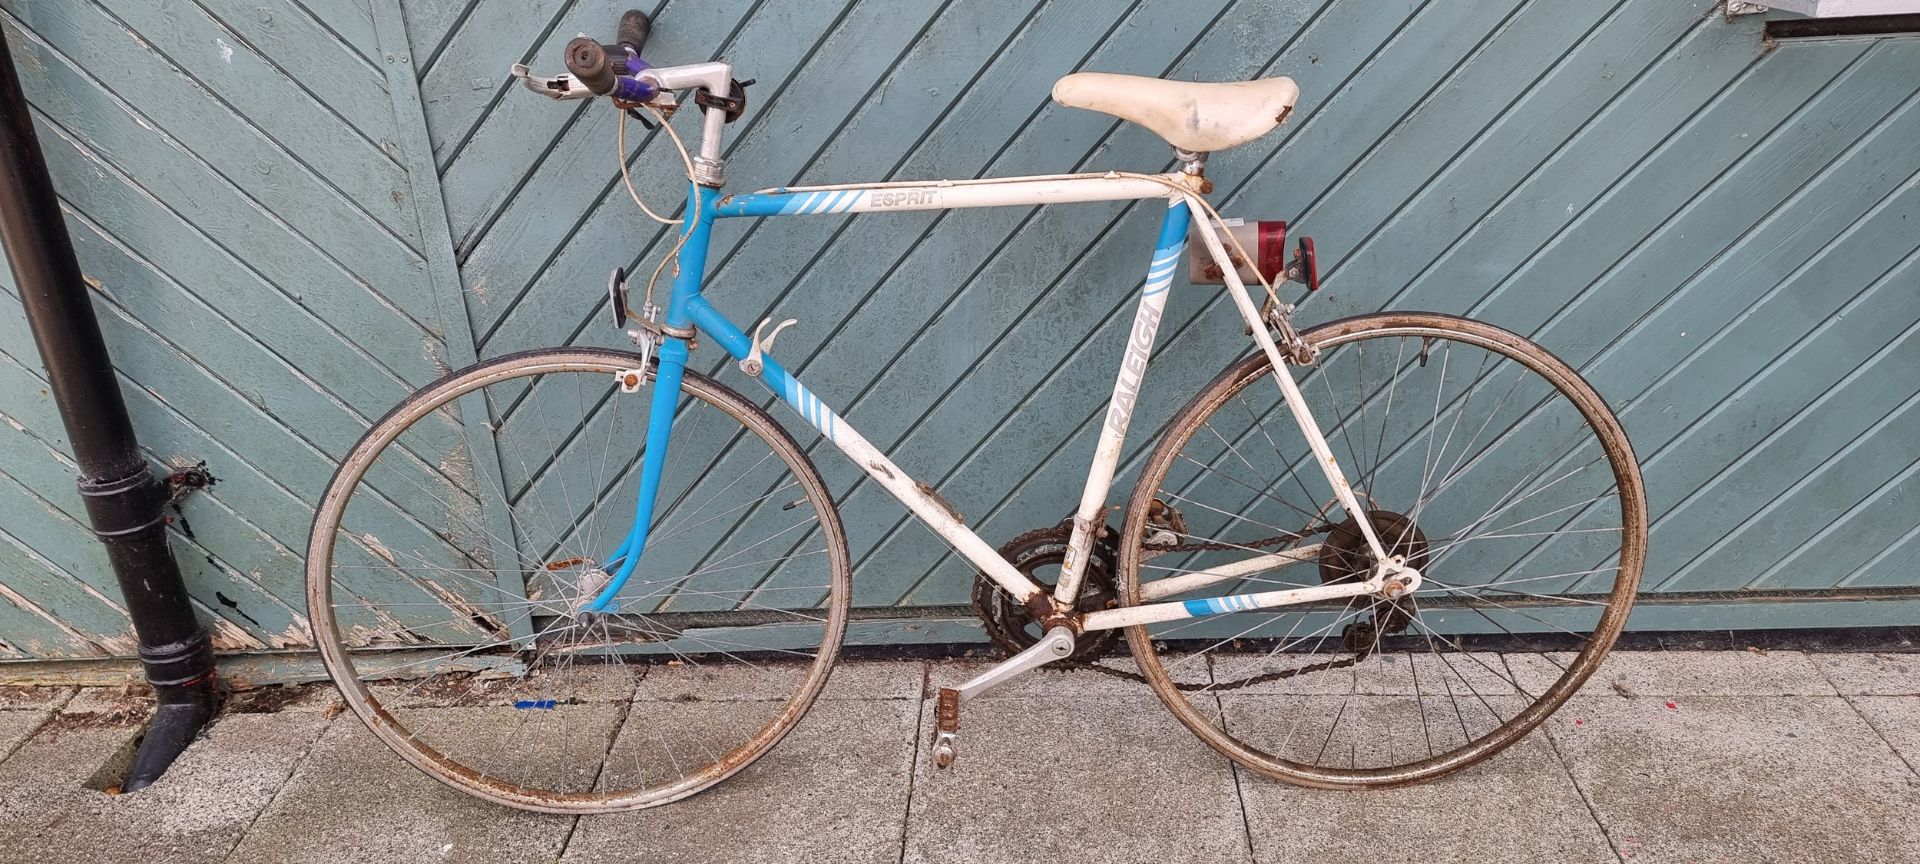 A Raleigh Esprit racing bicycle. - Image 2 of 6